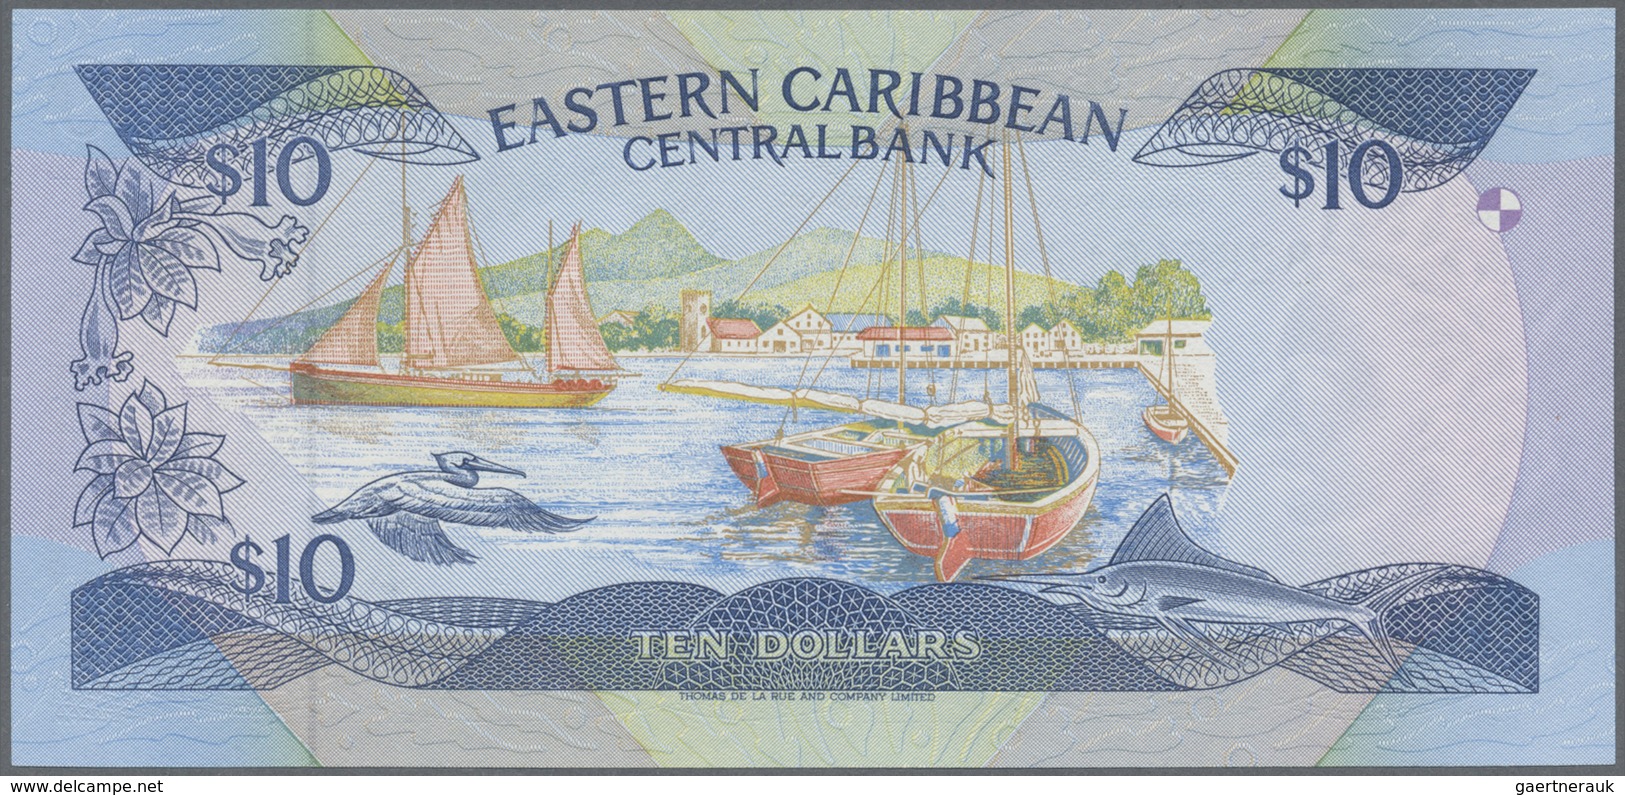 East Caribbean States / Ostkaribische Staaten: Set with 8 Banknotes 1980's, comprising 1 and 4 x 5 D